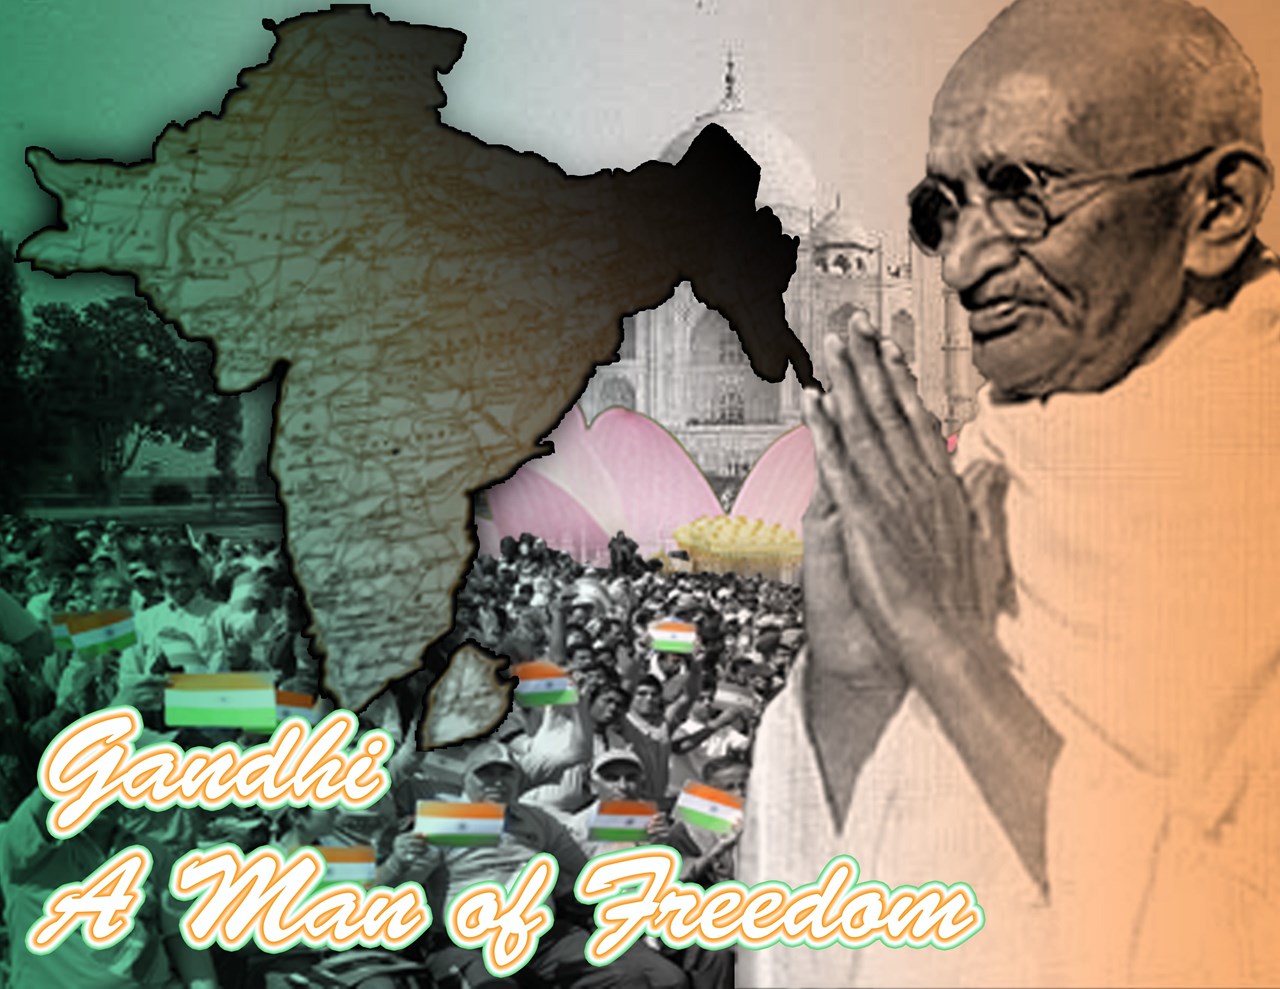 Picture of Gandhi - A Man of Freedom